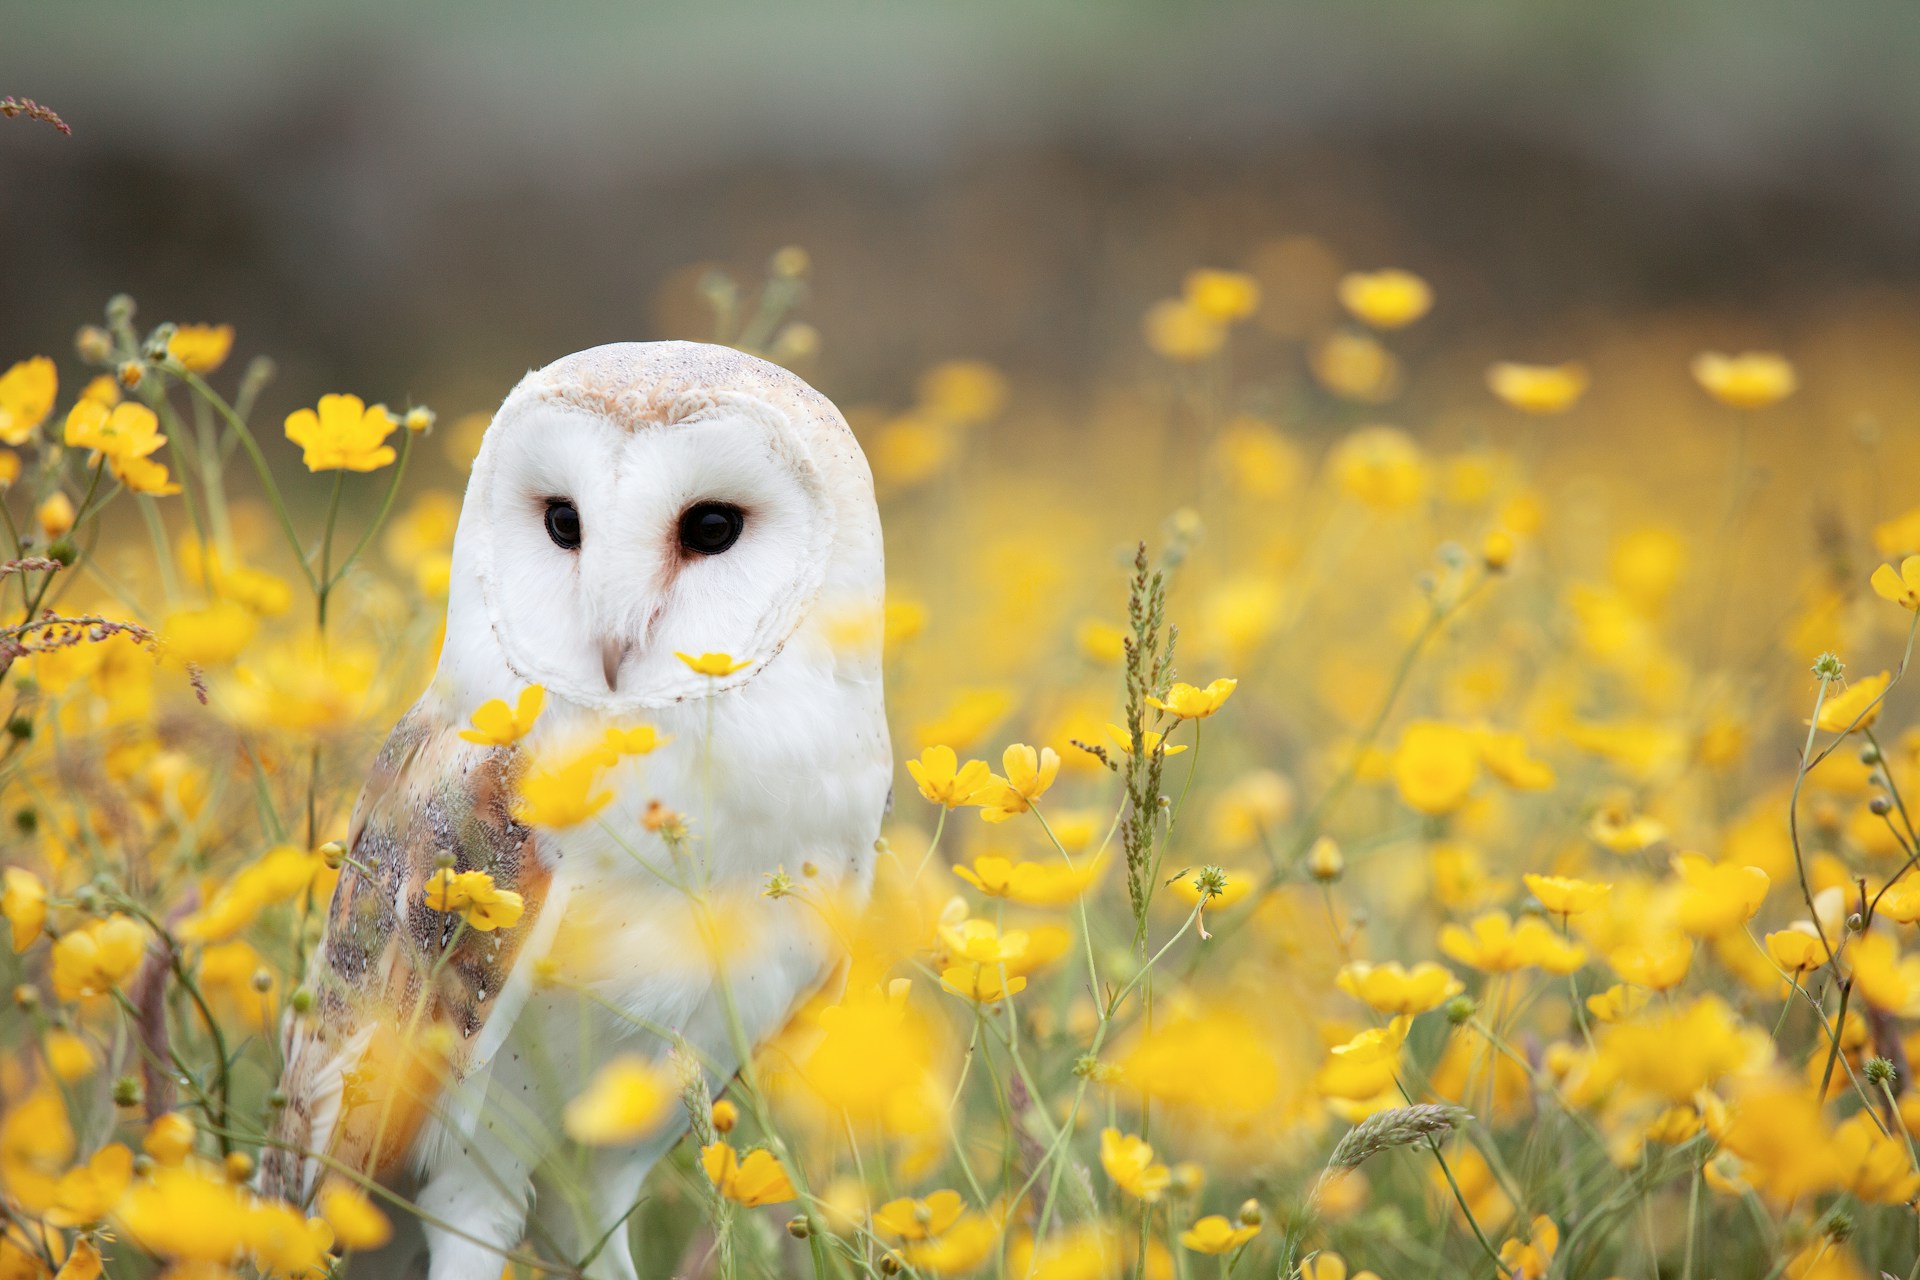 white owl in field of yellow flowers